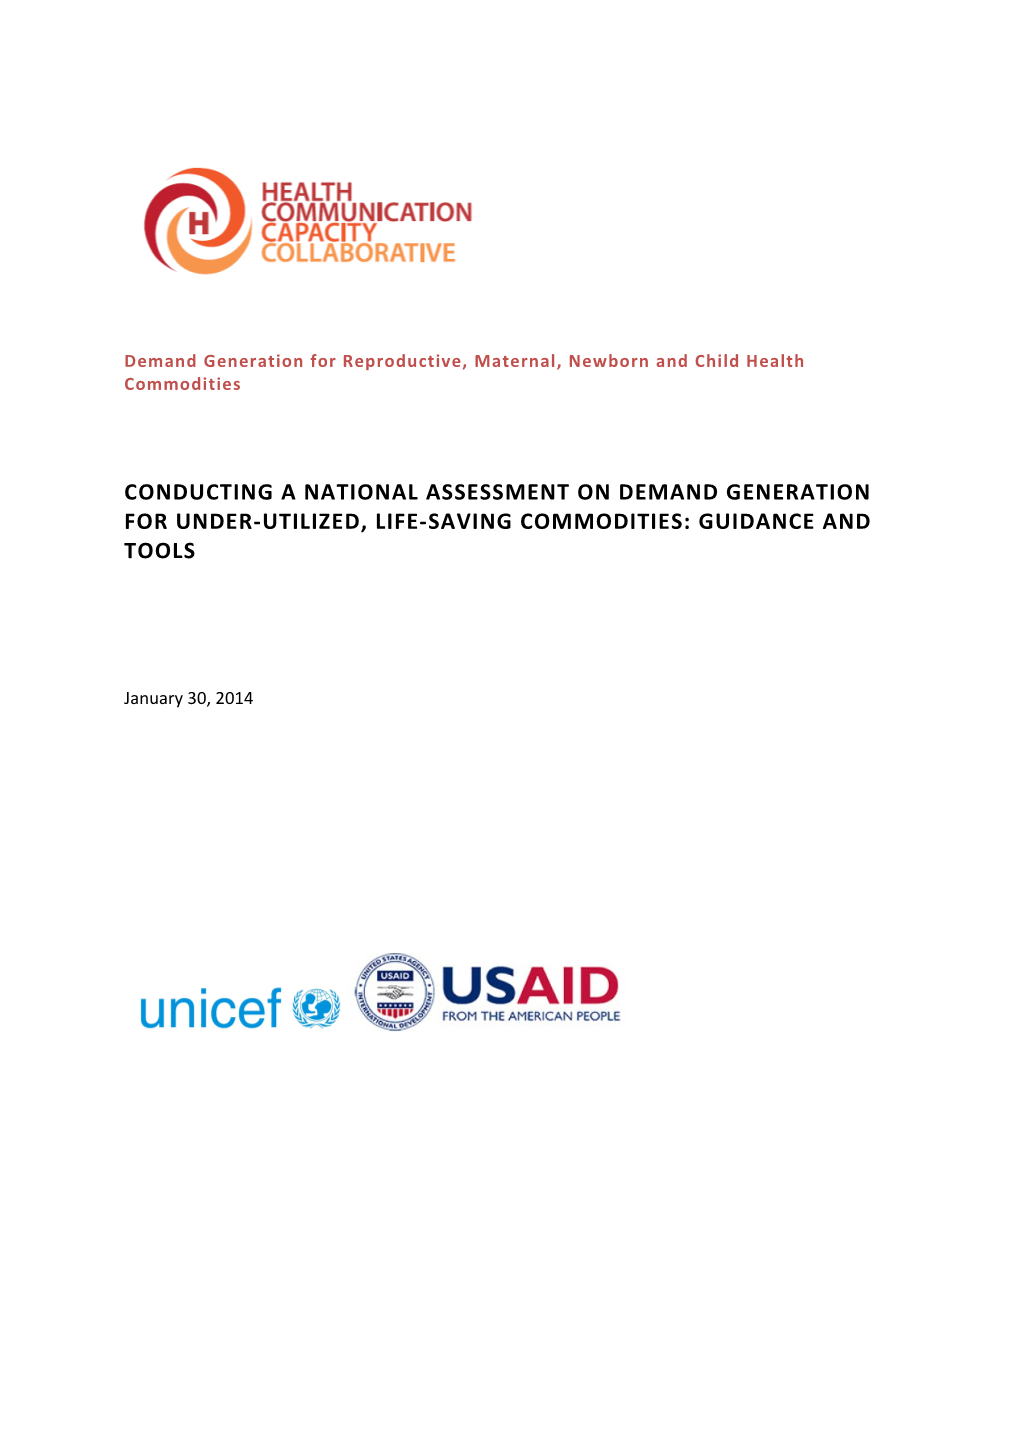 Demand Generation for Reproductive, Maternal, Newborn and Child Health Commodities